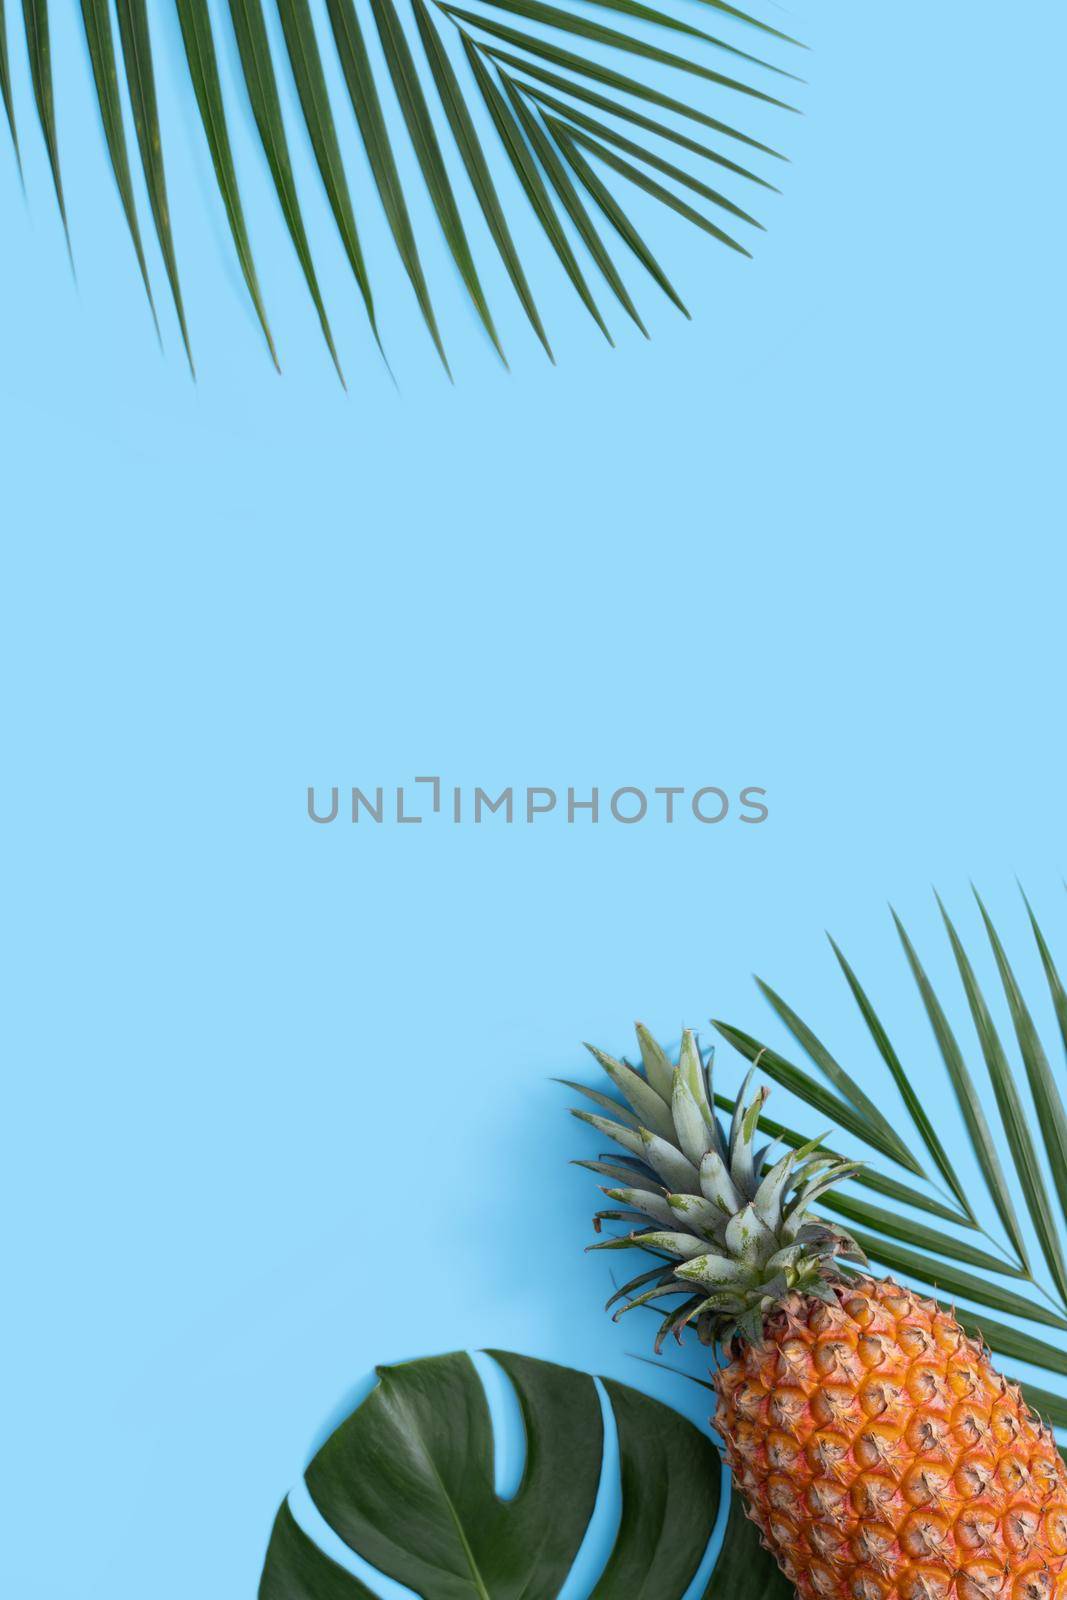 Top view of fresh pineapple with tropical palm and monstera leaves on blue table background.